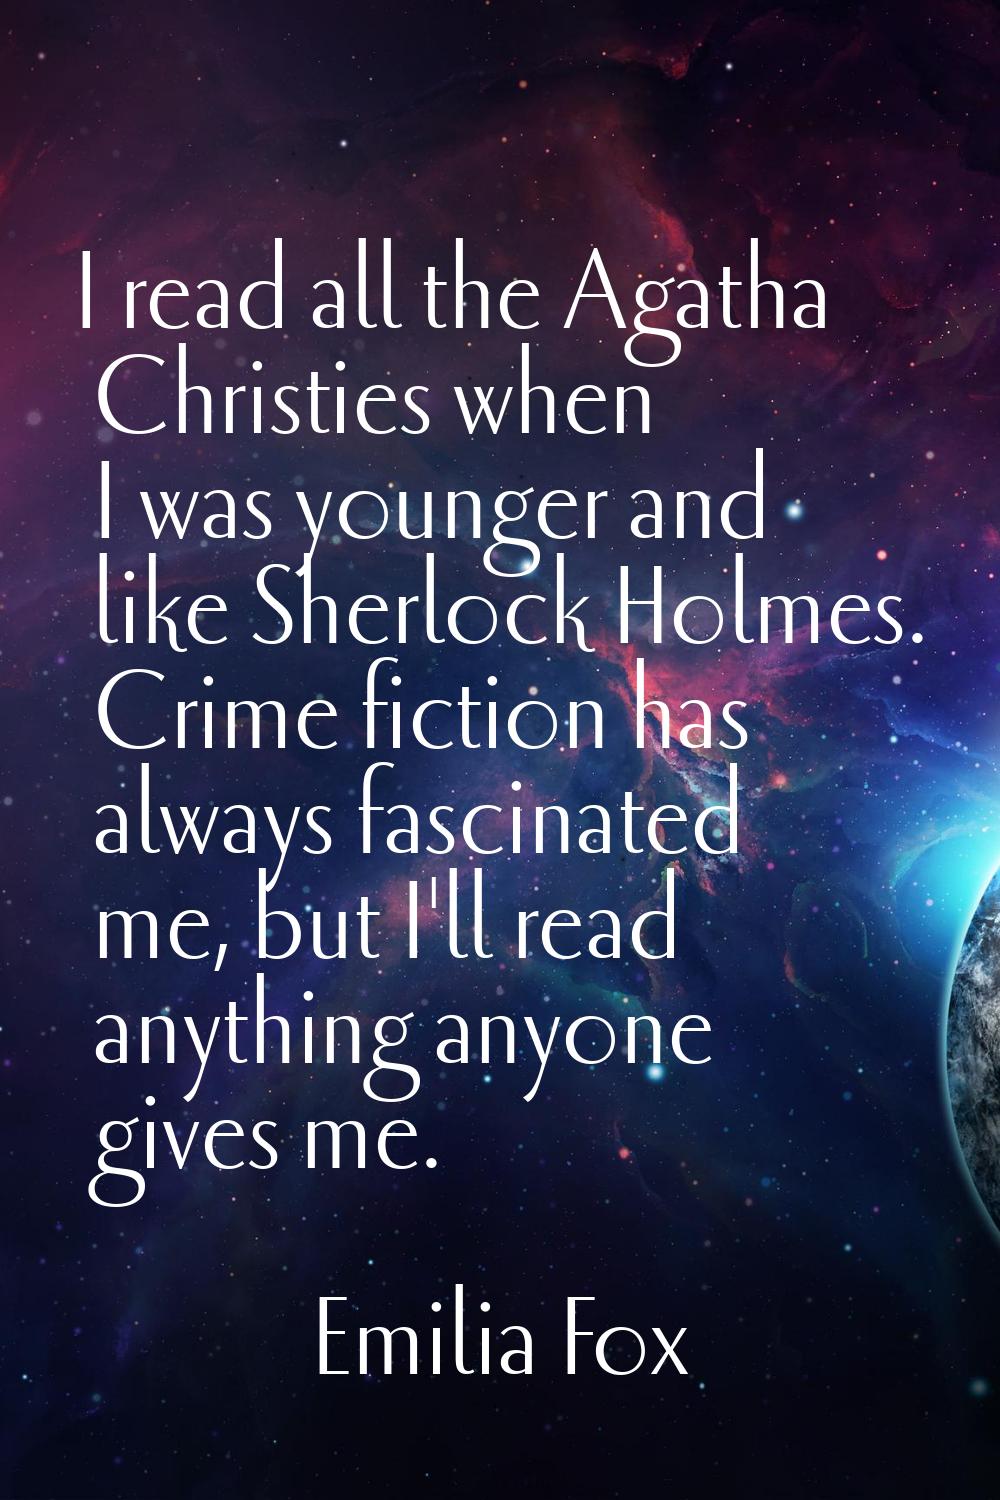 I read all the Agatha Christies when I was younger and like Sherlock Holmes. Crime fiction has alwa